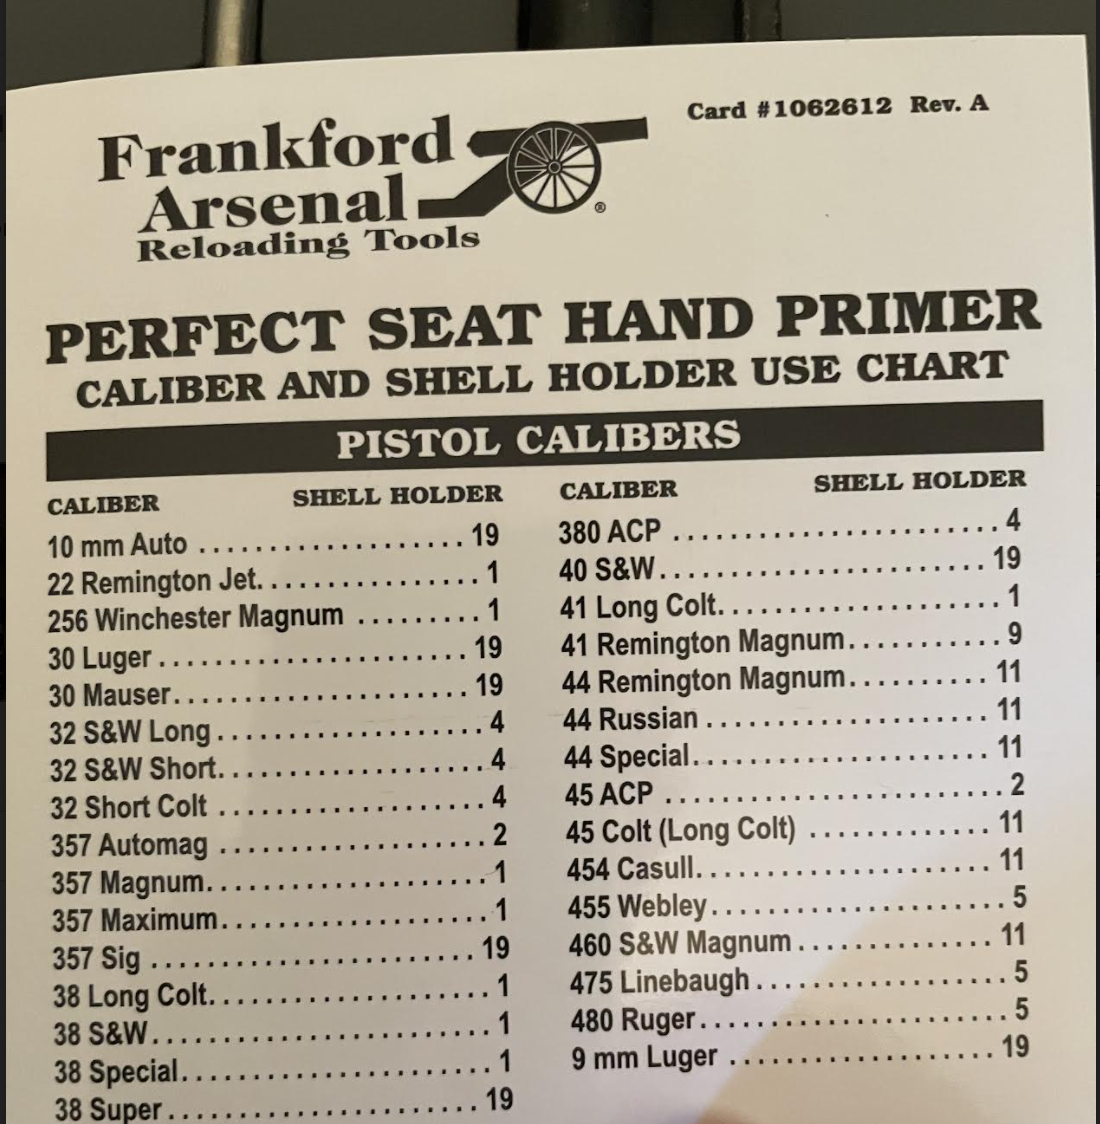 Hand Primer Card for FA Perfect Seat Hand Primer